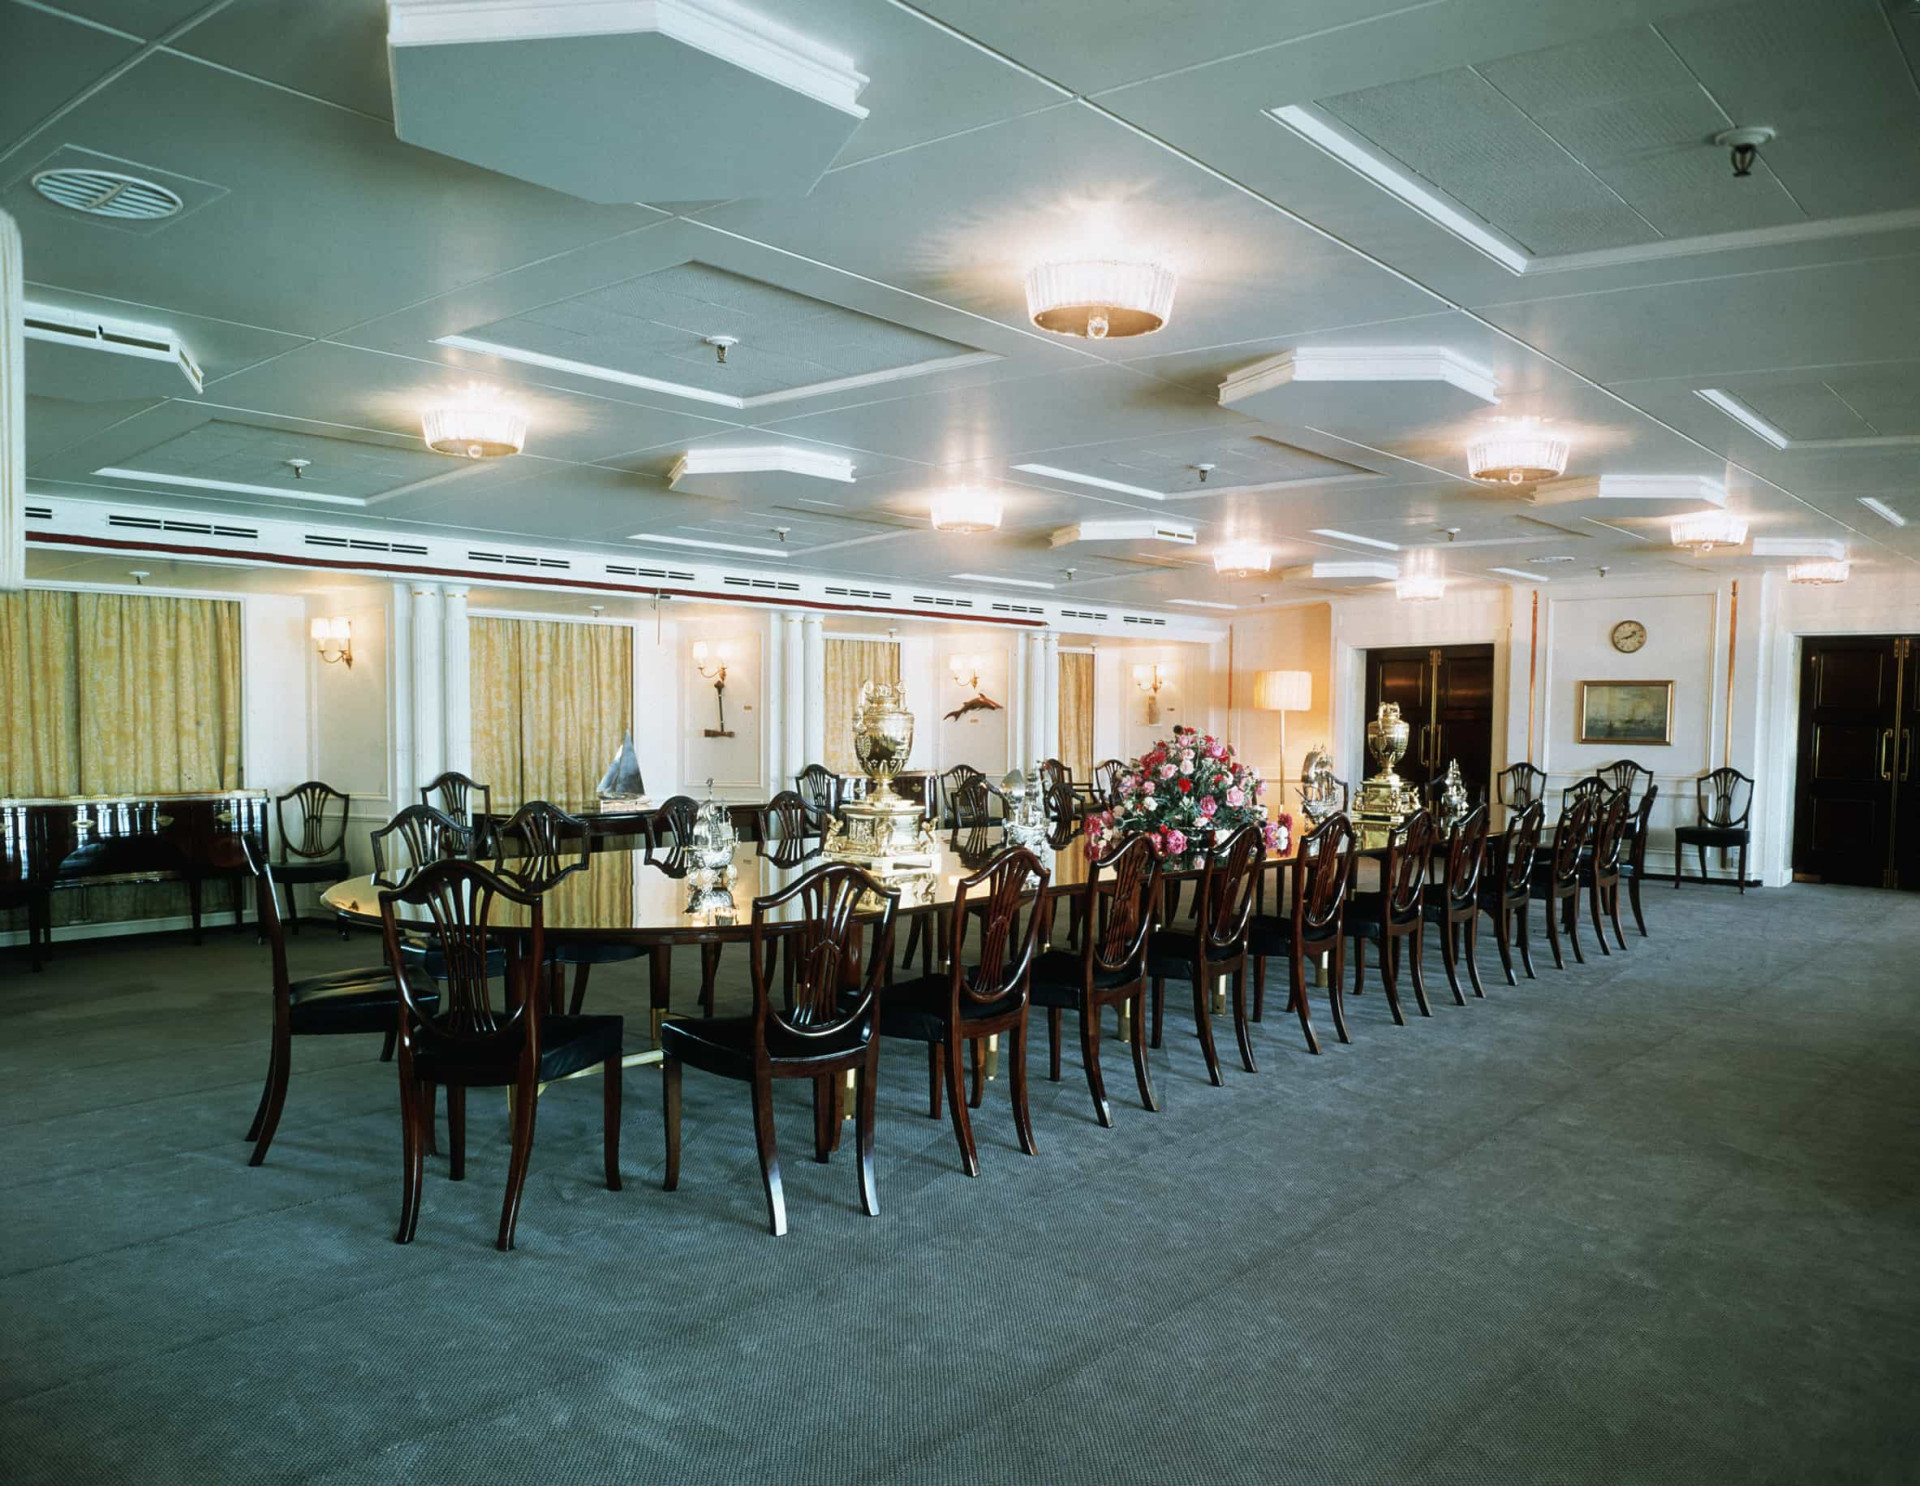 <p>The Reagan's dined in <em>Britannia</em>'s grand dining room (pictured), which could host up to 56 guests. The dining room was set within the ship's royal apartments and included a lounge, drawing room, and guest bedrooms.</p><p>You may also like:<a href="https://www.starsinsider.com/n/394229?utm_source=msn.com&utm_medium=display&utm_campaign=referral_description&utm_content=474709v3en-ph"> All the ways Leonardo DiCaprio spends his millions</a></p>